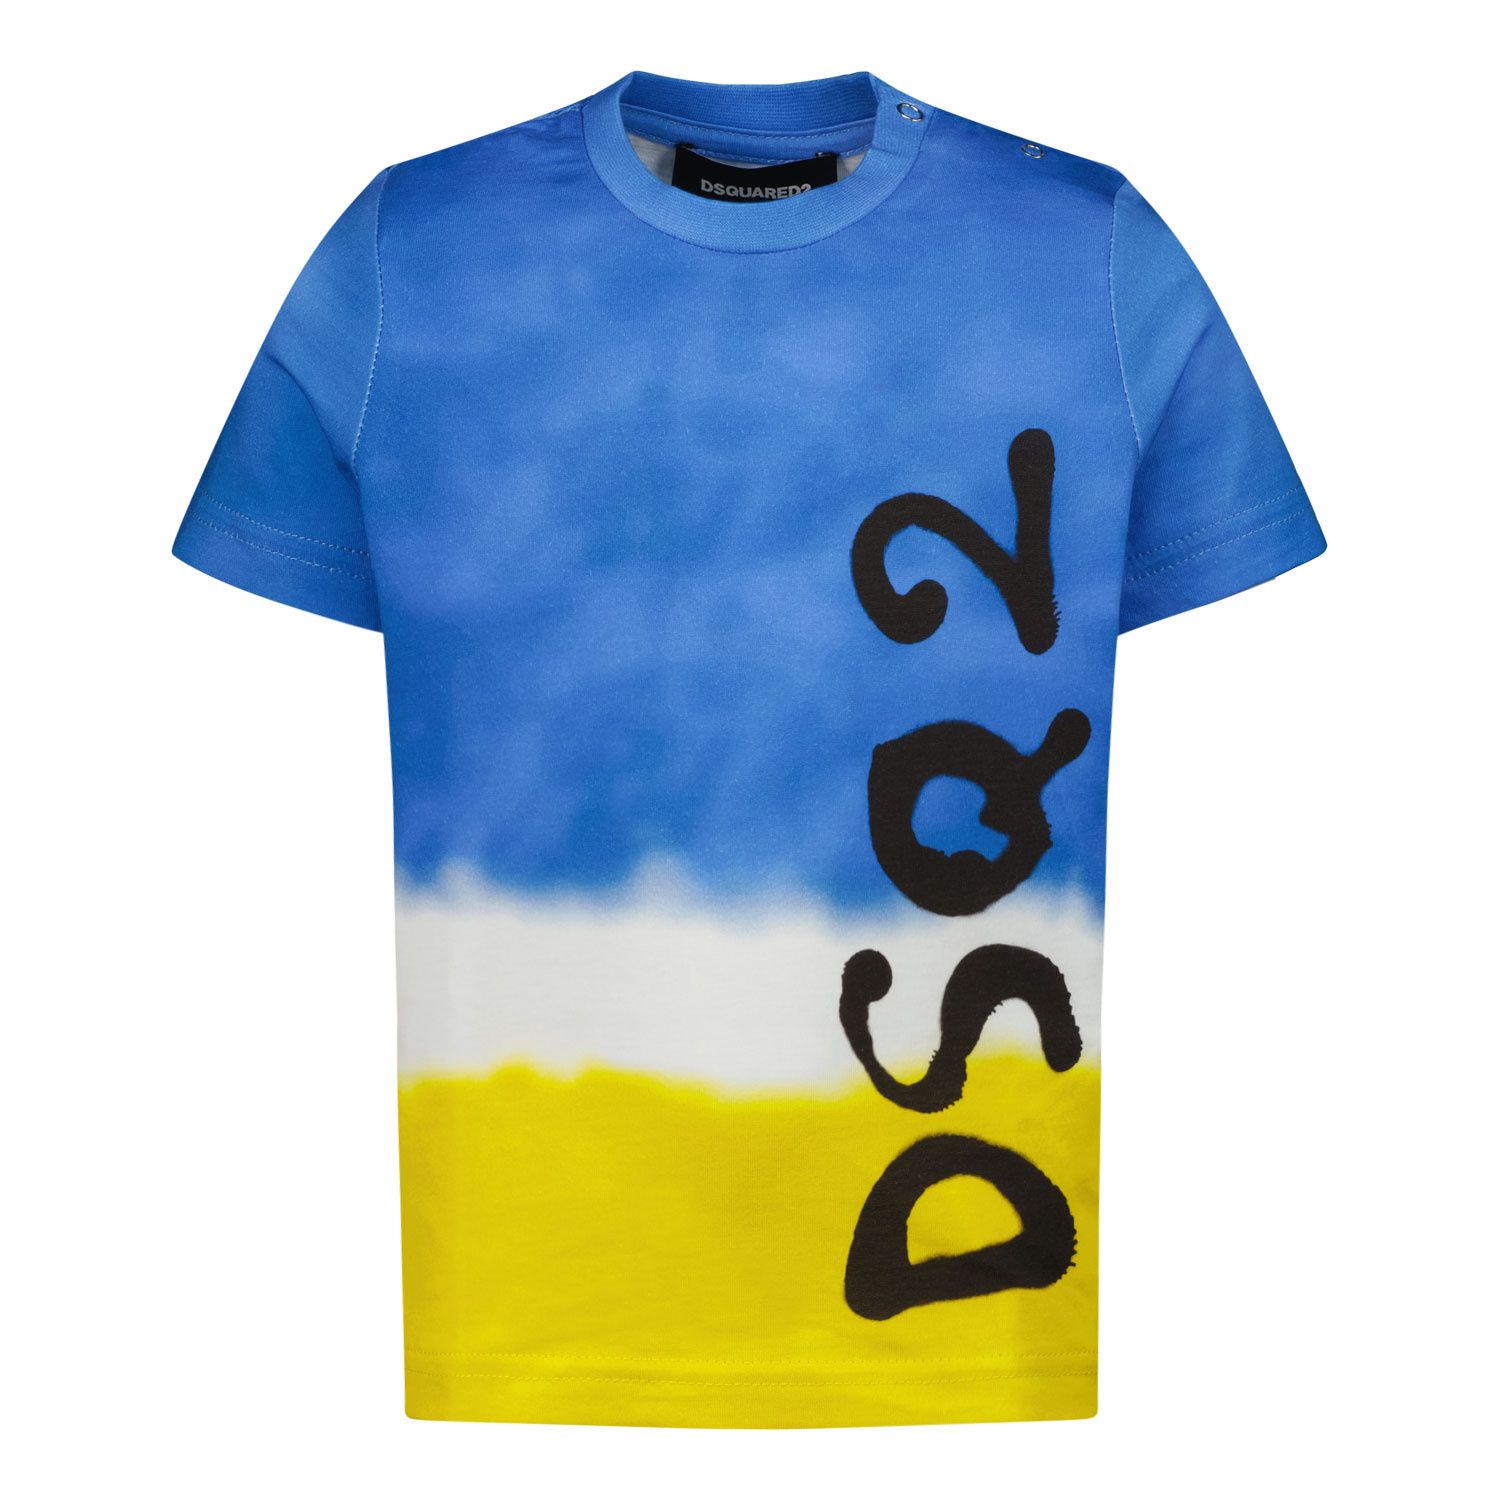 Picture of Dsquared2 DQ0967 baby shirt blue